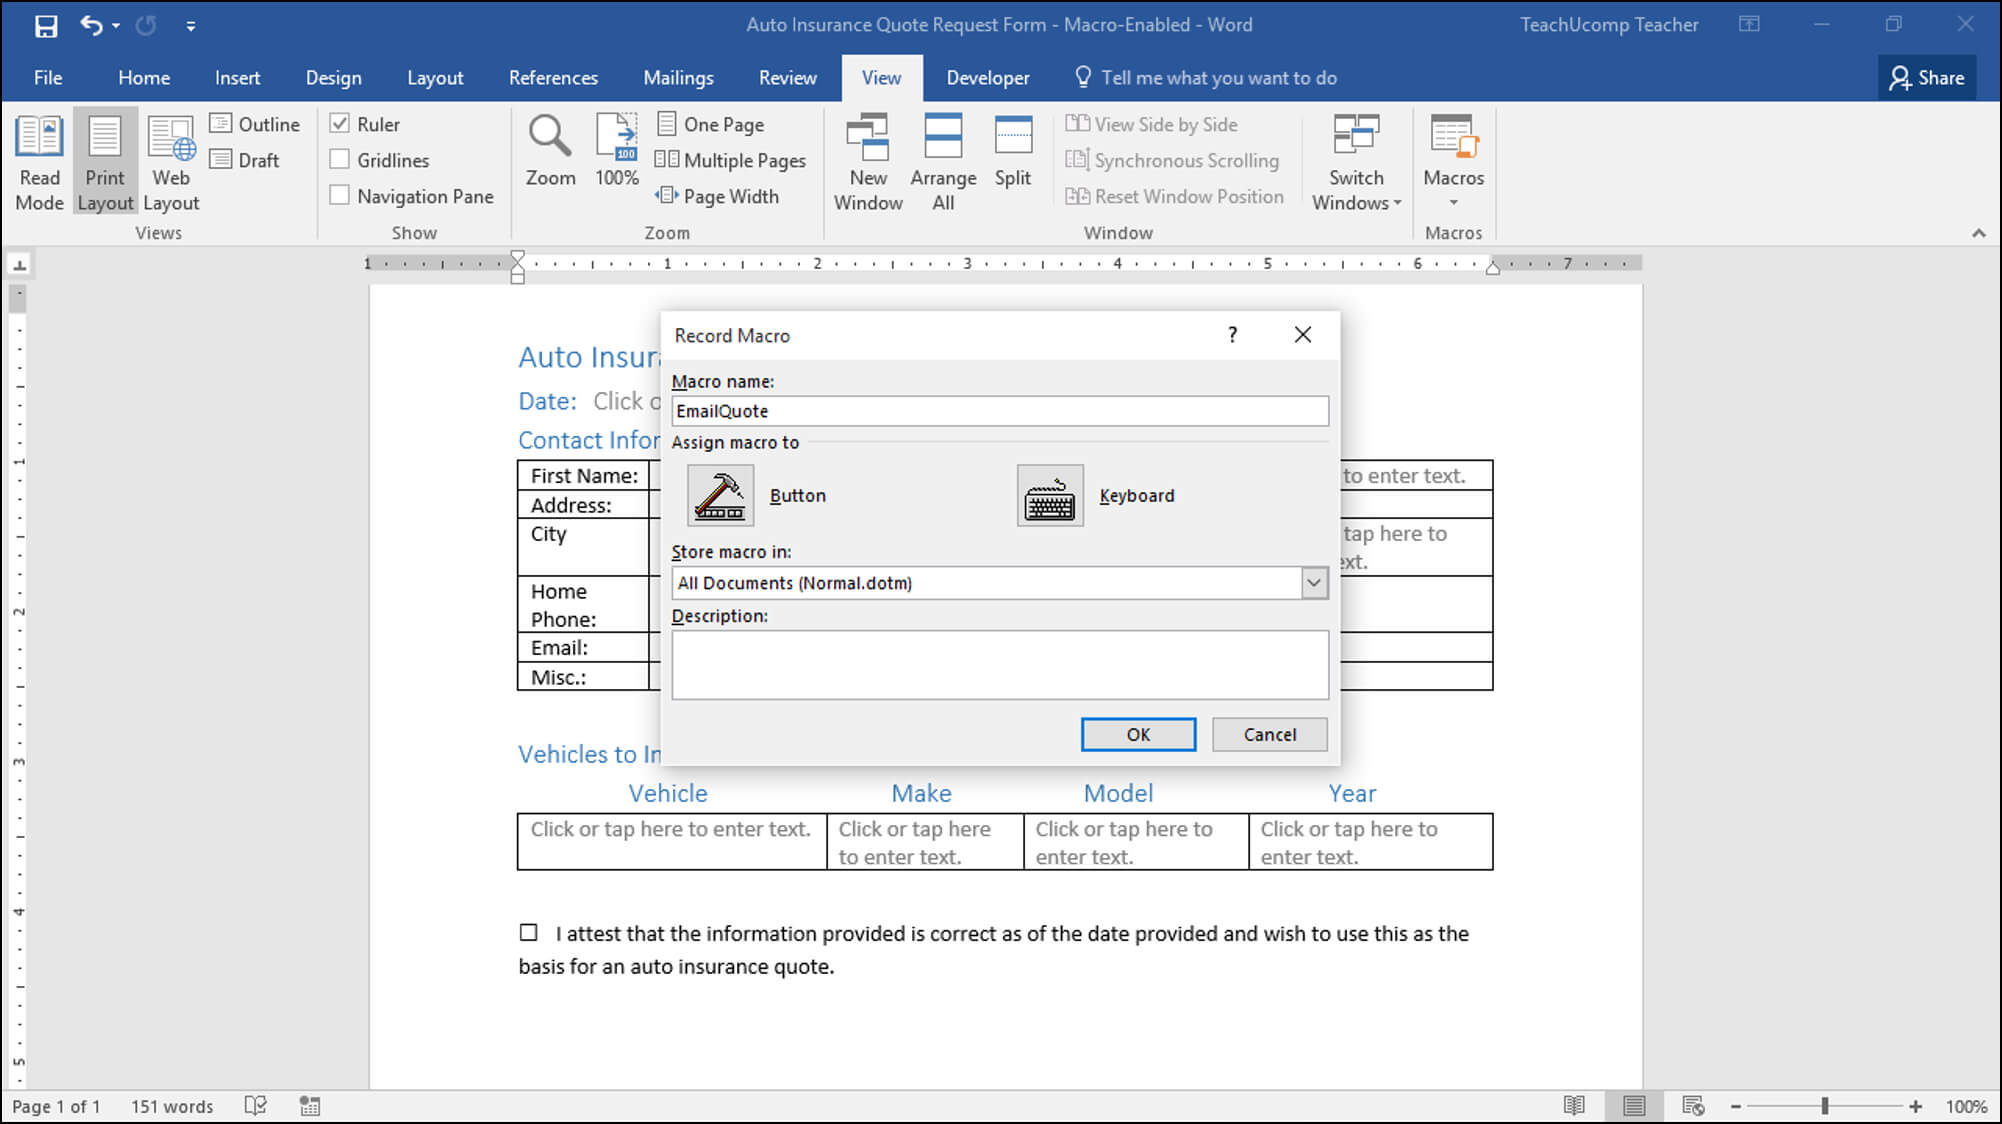 Record A Macro In Word - Instructions And Video Lesson With Word Macro Enabled Template